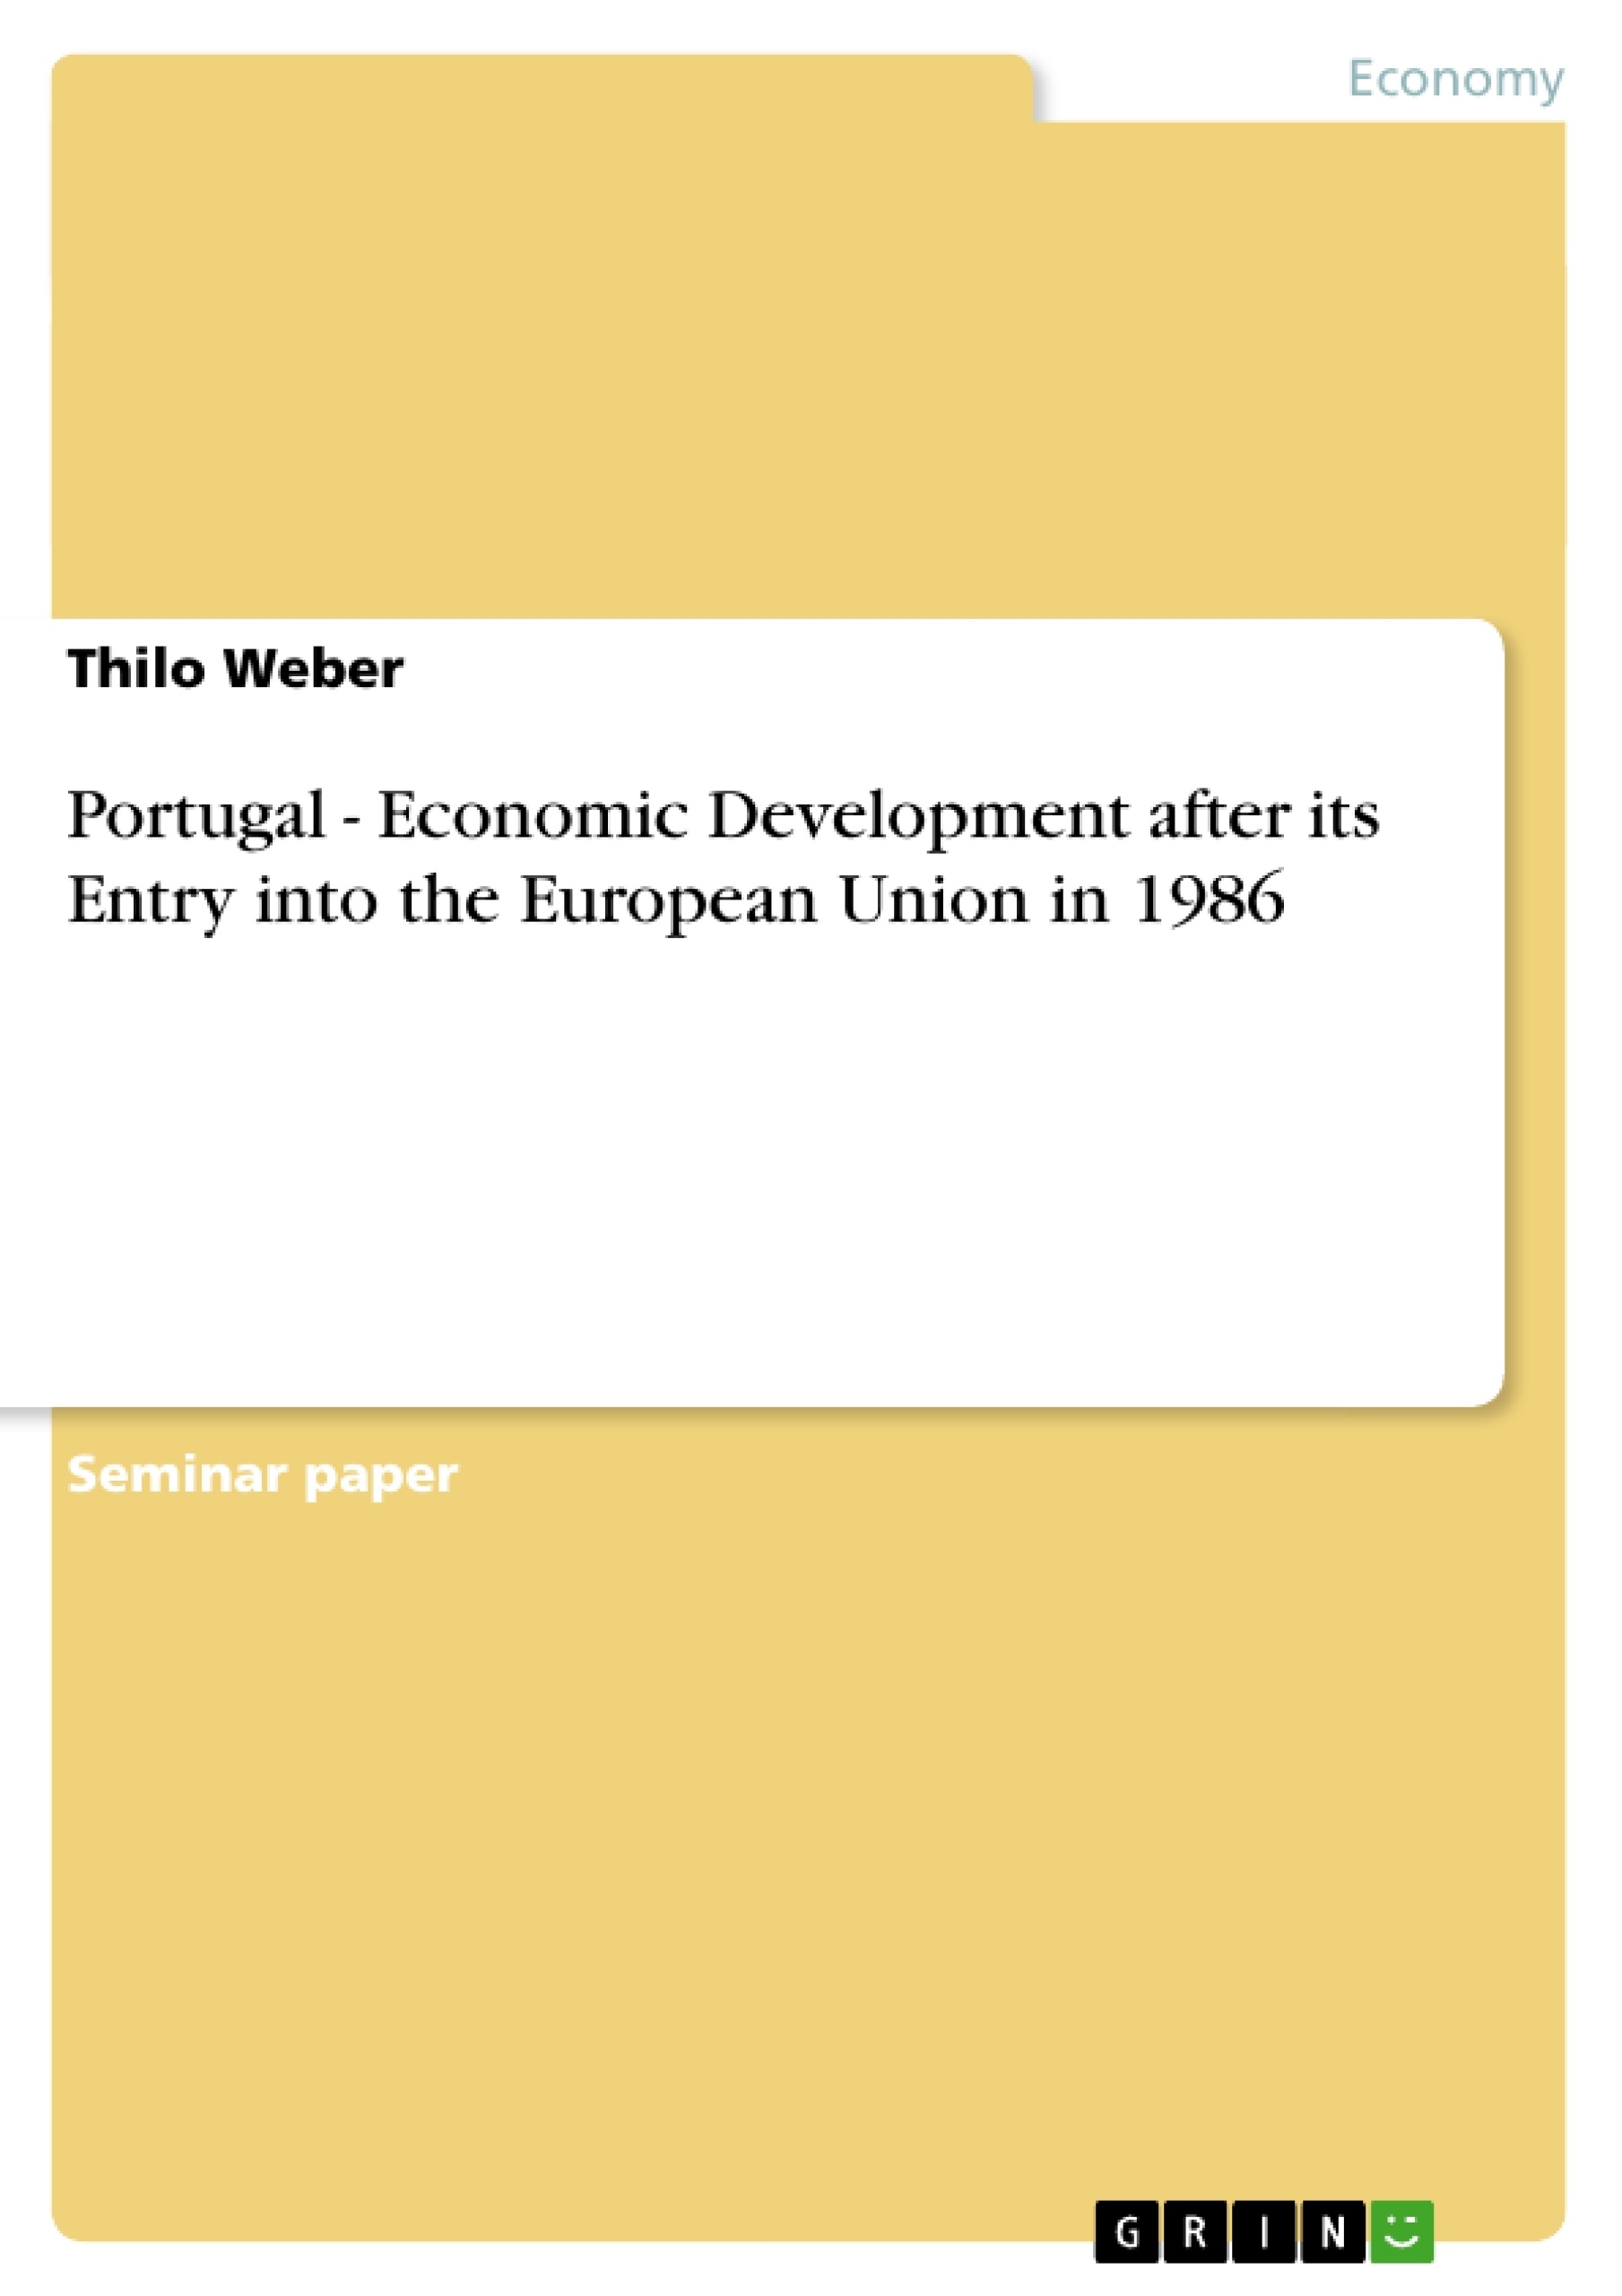 Title: Portugal - Economic Development after its Entry into the European Union in 1986